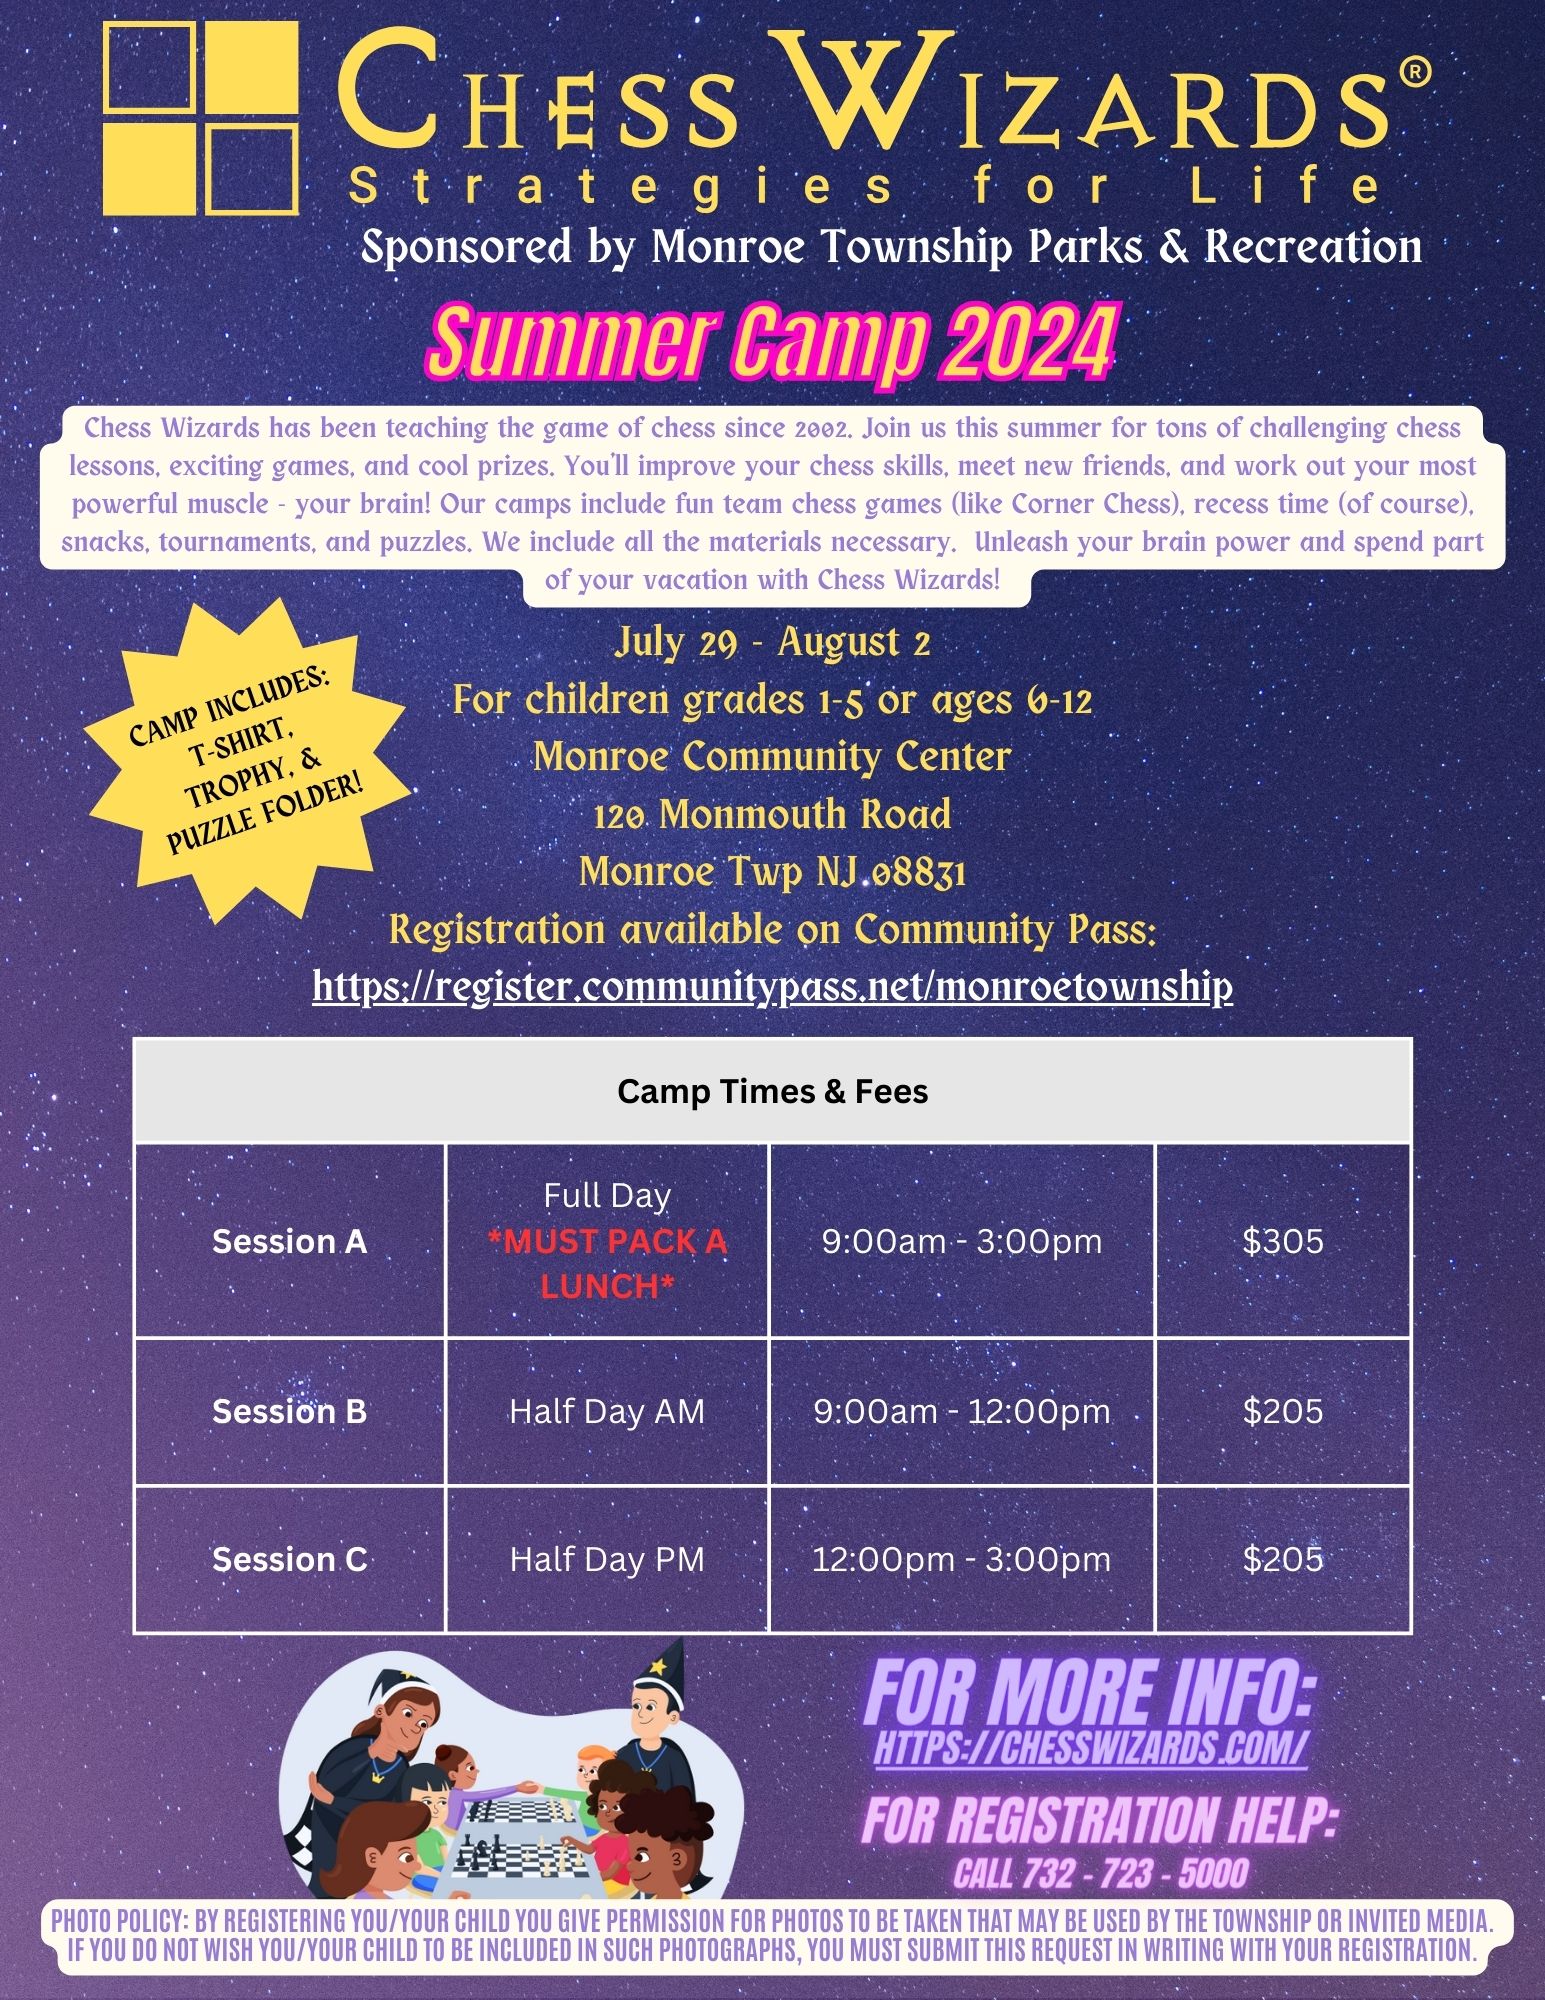 CHESS WIZARDS SUMMER CAMP 2024